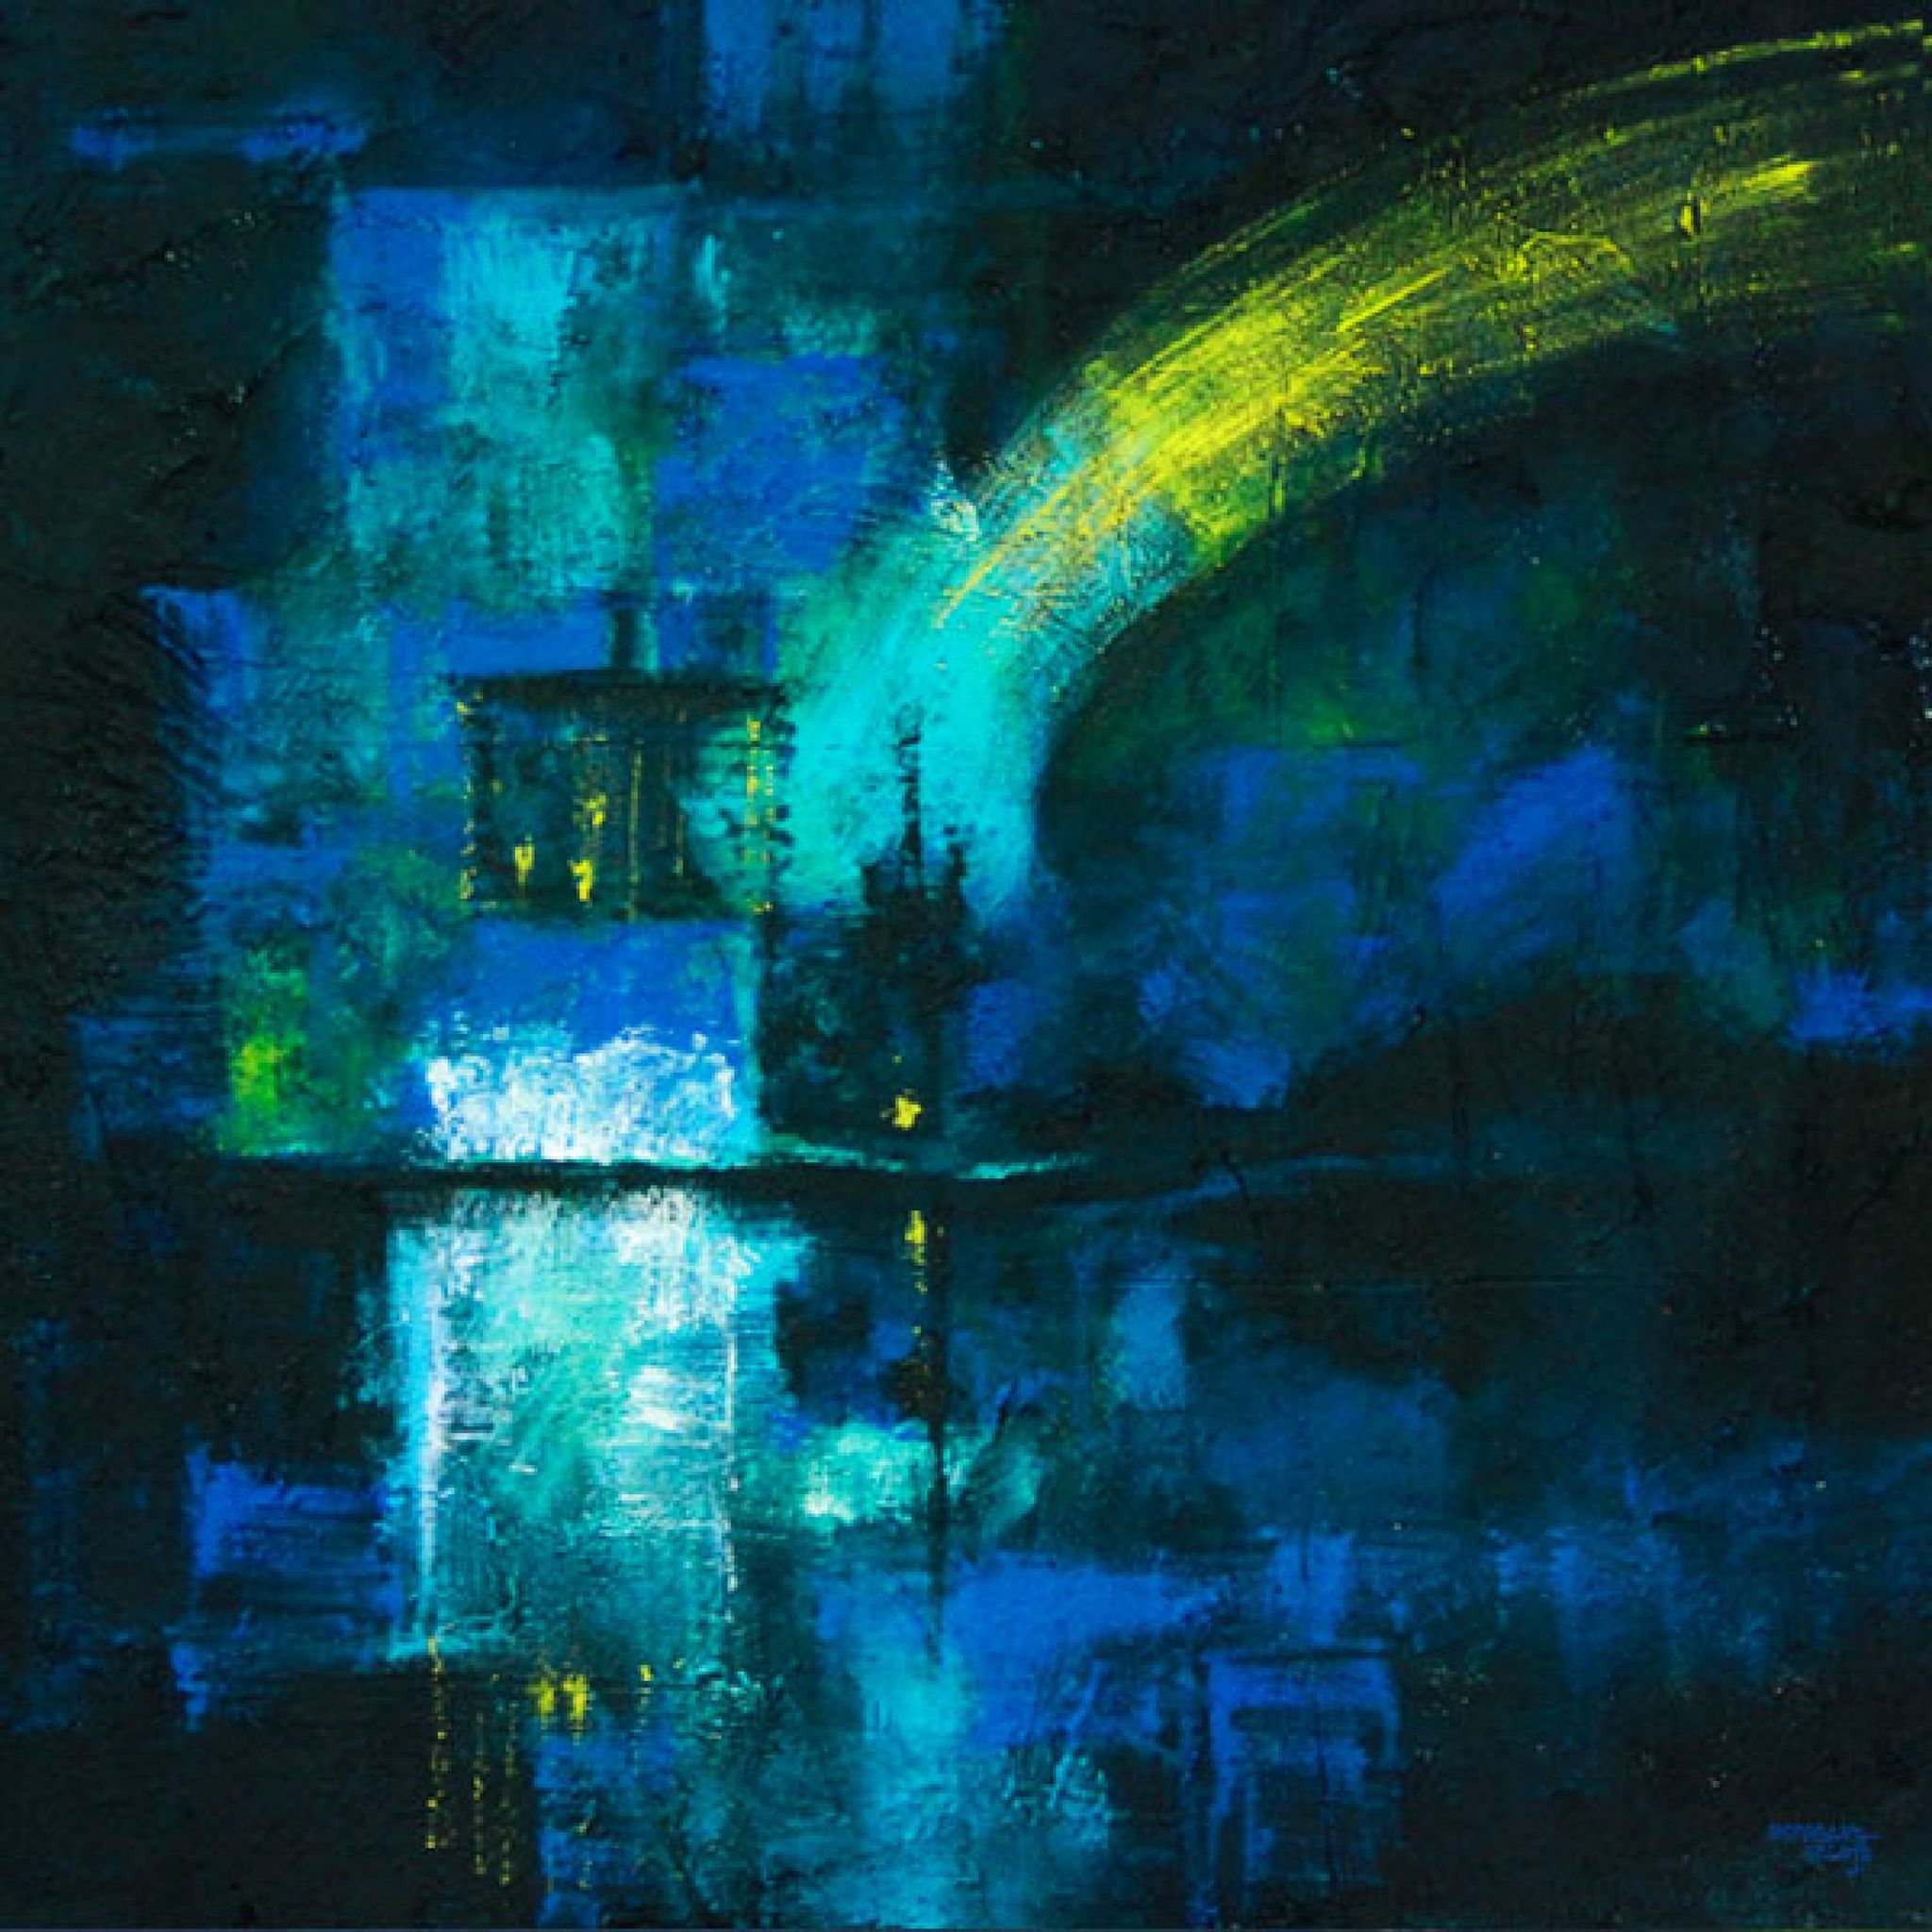 Night light - Acrylic on Canvas - 24 in x 24 in